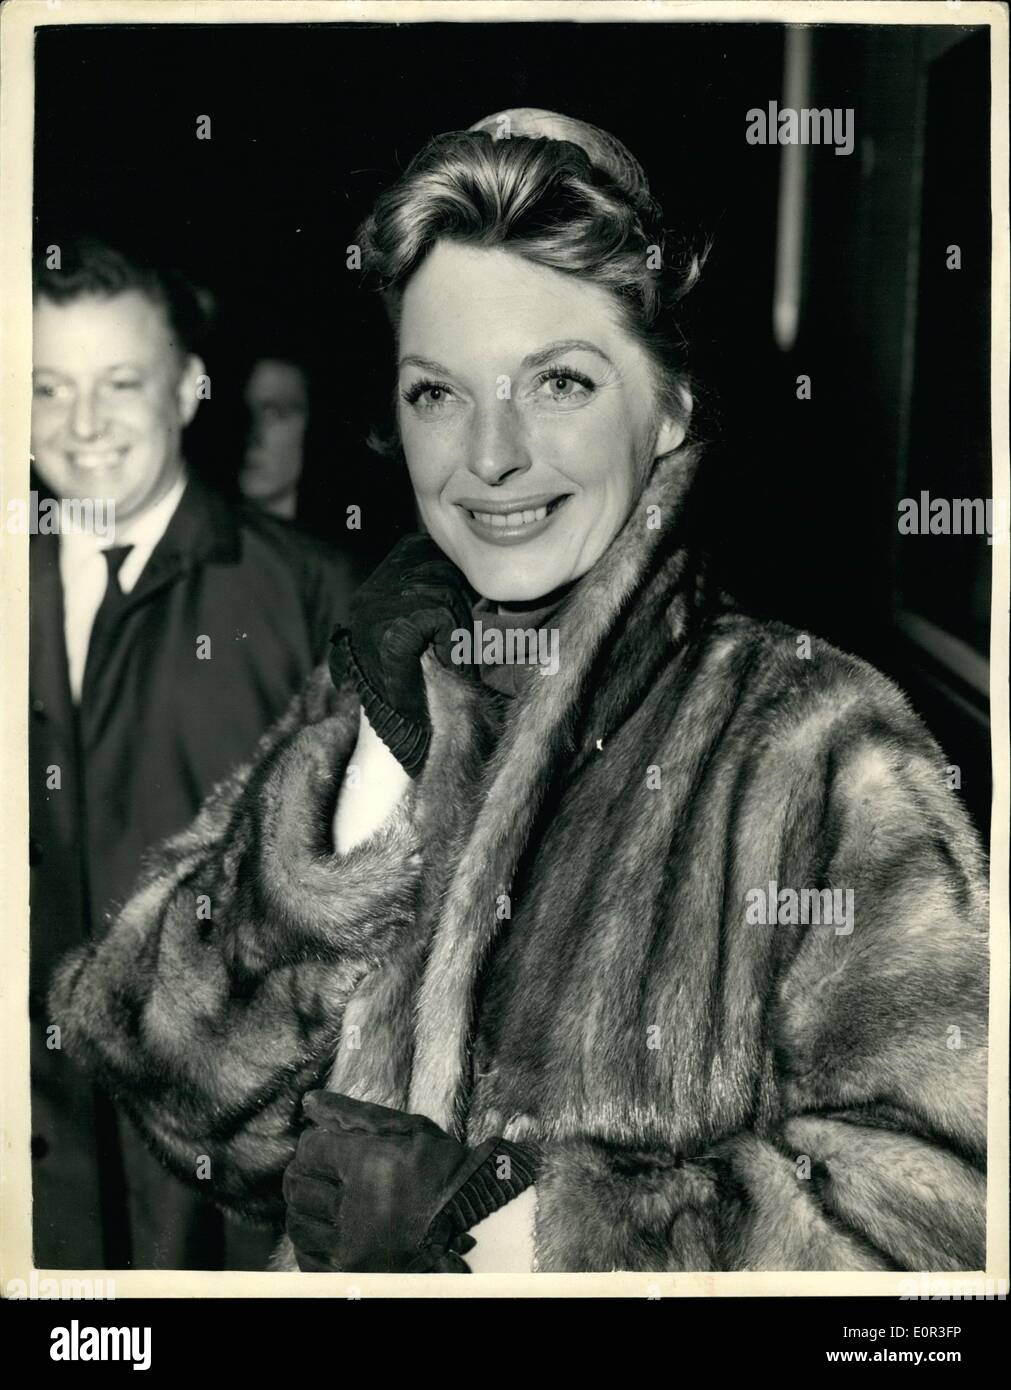 Nov. 11, 1957 - American Singing Star Arrives In London julie london At paddington: Julie London popular American singing star and her two children Lisa (5) and Stacy(8) arrived in London this morning- from the United States. She is to make her first British film here ''The Question of Adultery''. Photo shows. Julie London on her arrival at Paddington this afternoon. Stock Photo